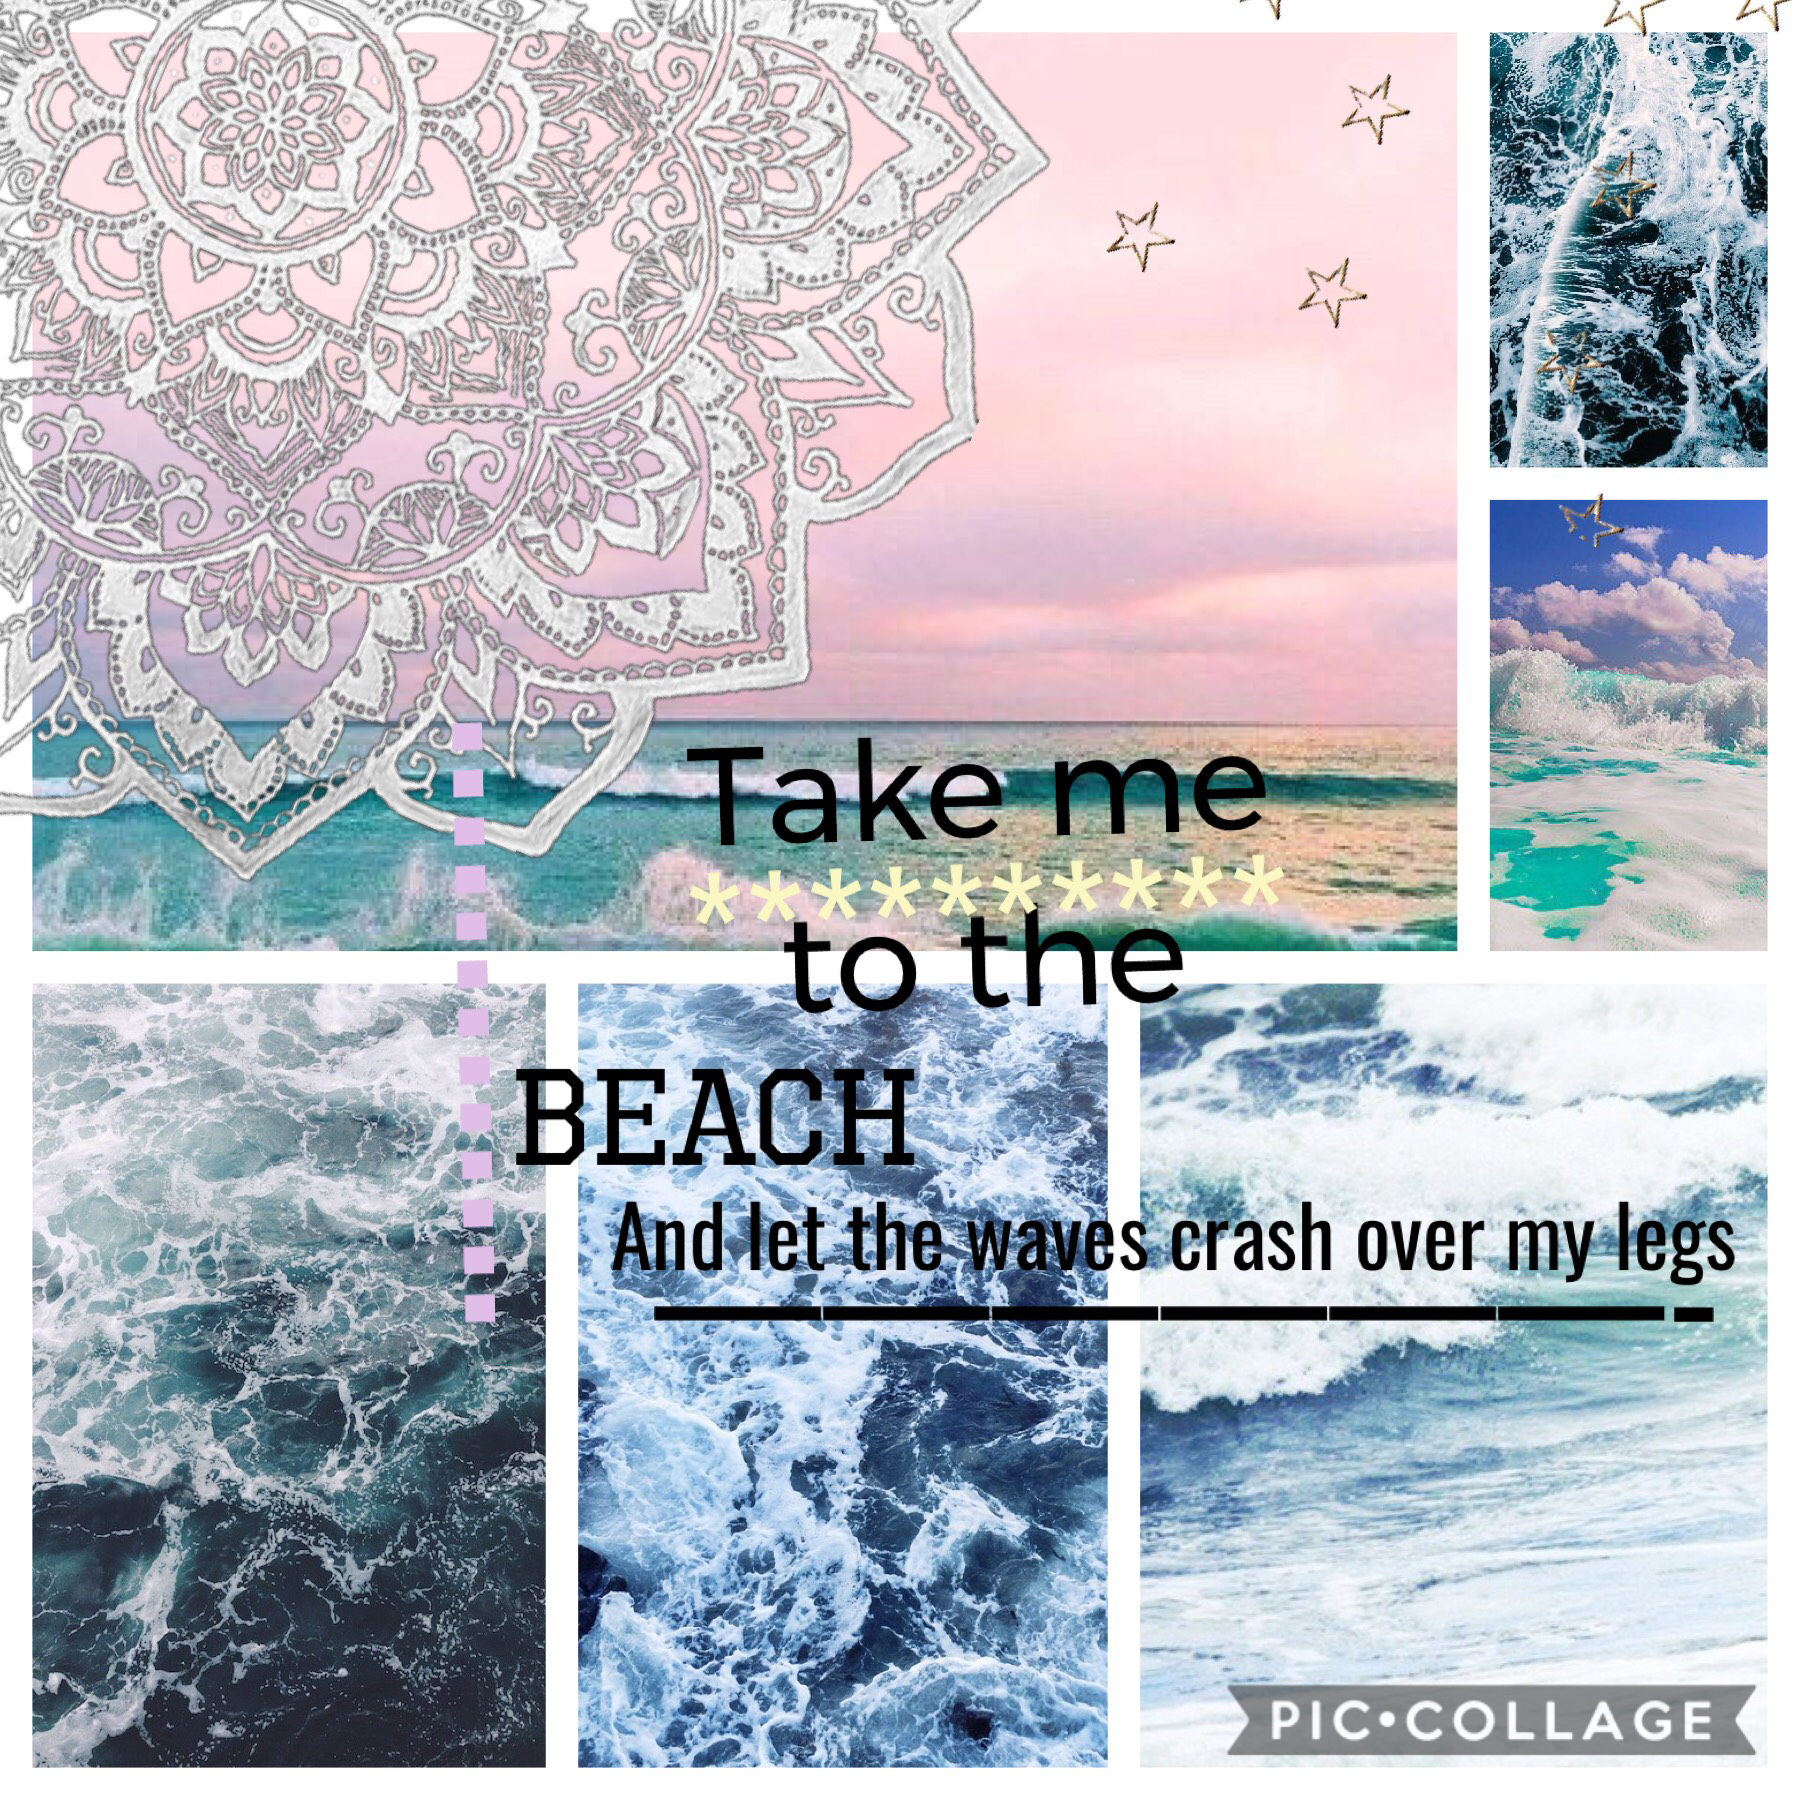 This is the last collage for the beach theme new theme coming soon!